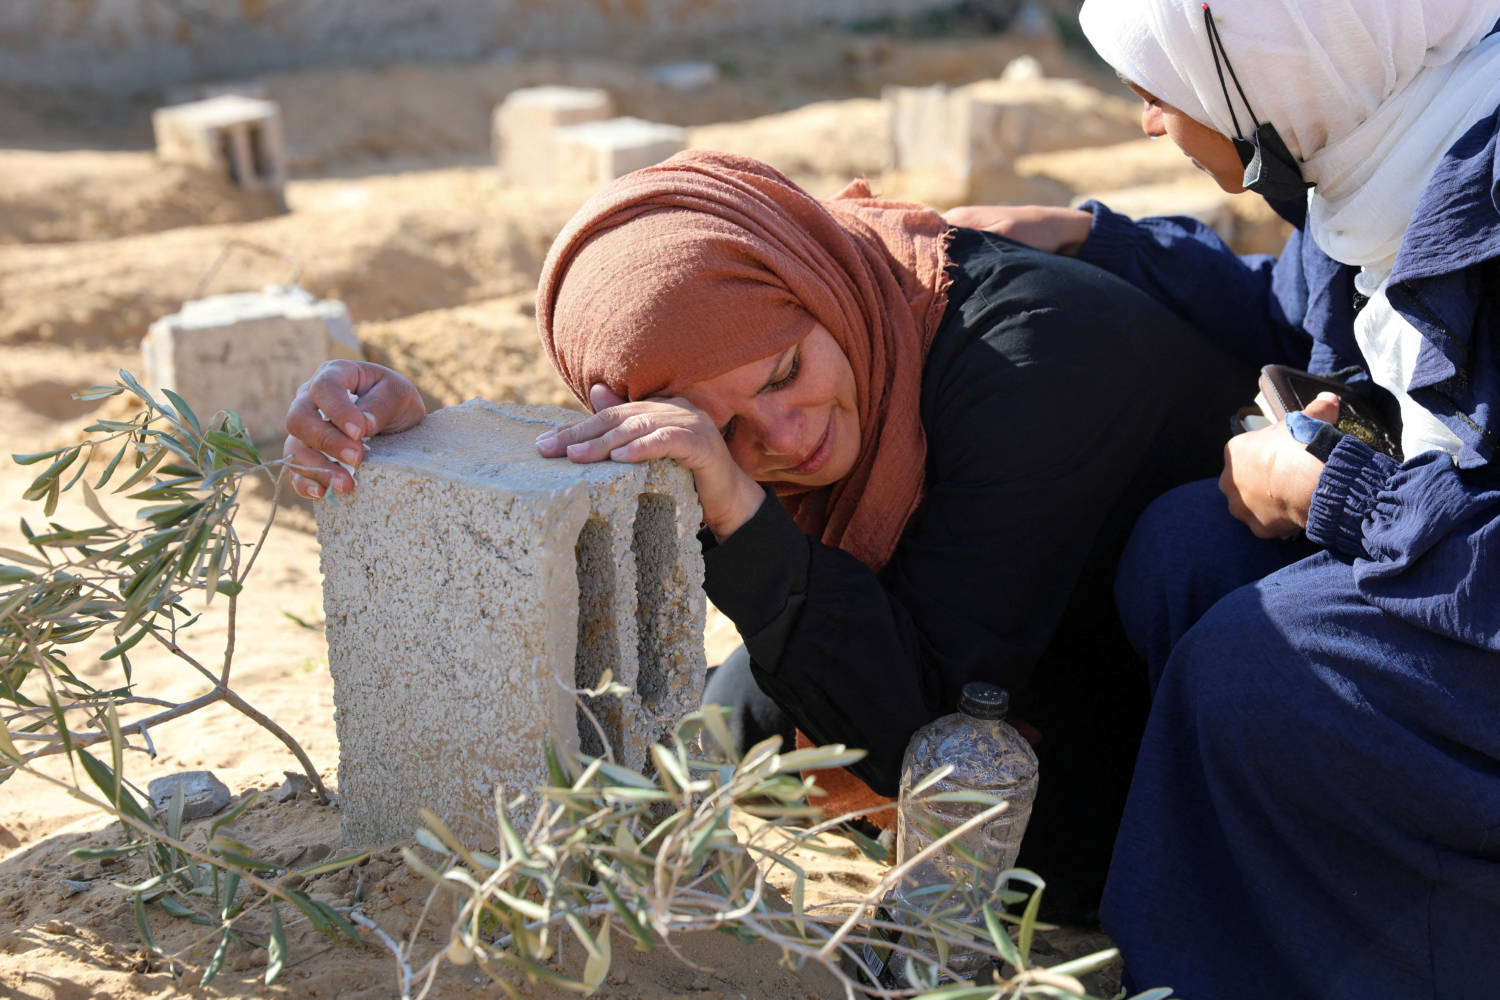 A Palestinian Woman Reacts At The Grave Of Her Son Killed In An Israeli Strike, In Khan Younis